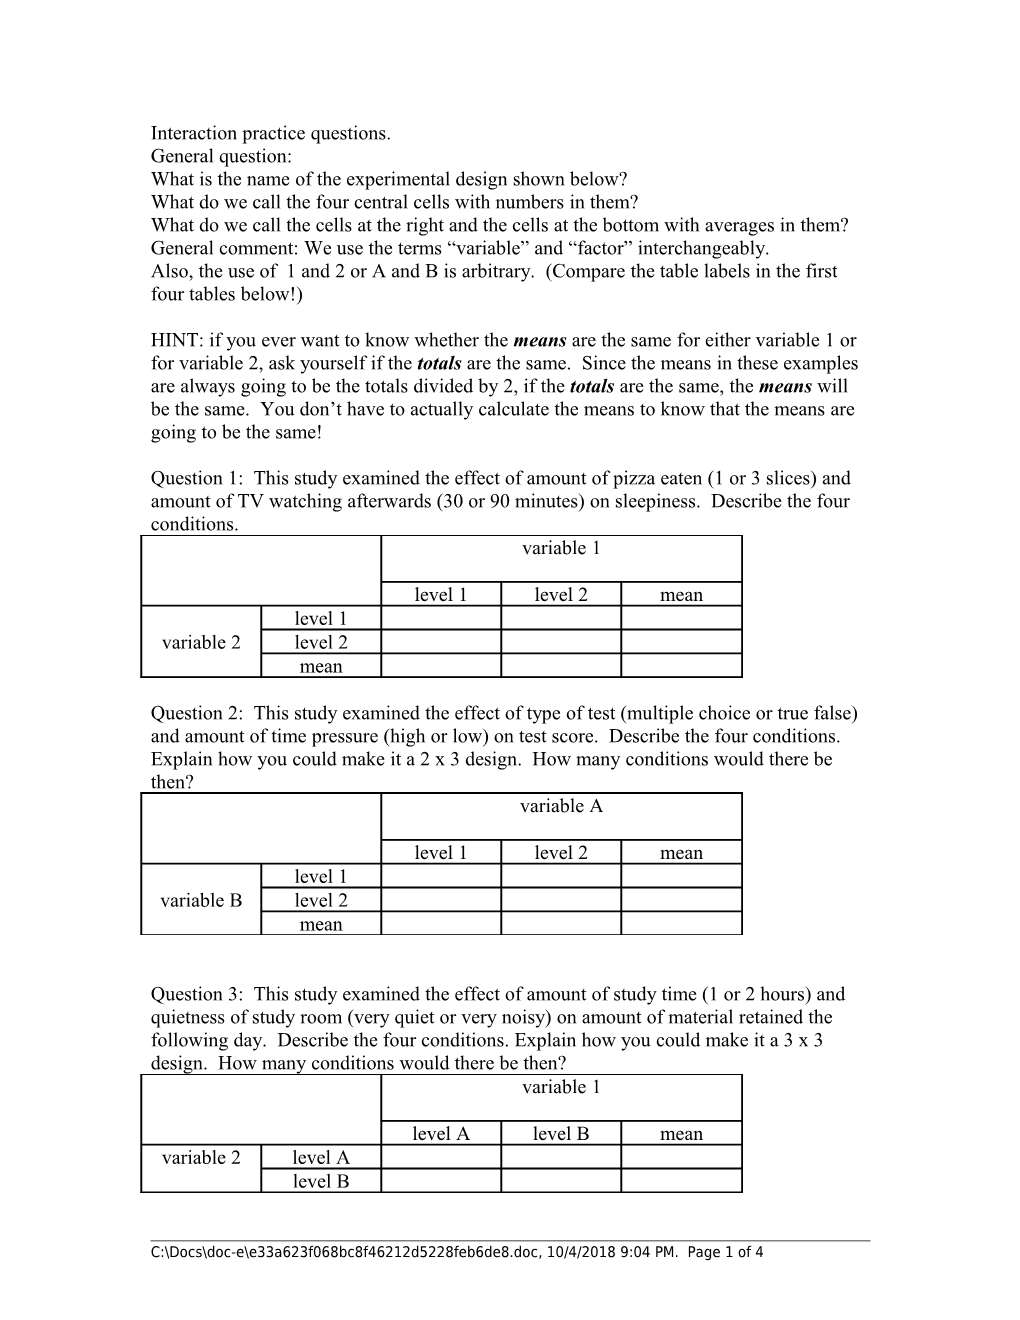 Interaction Practice Questions